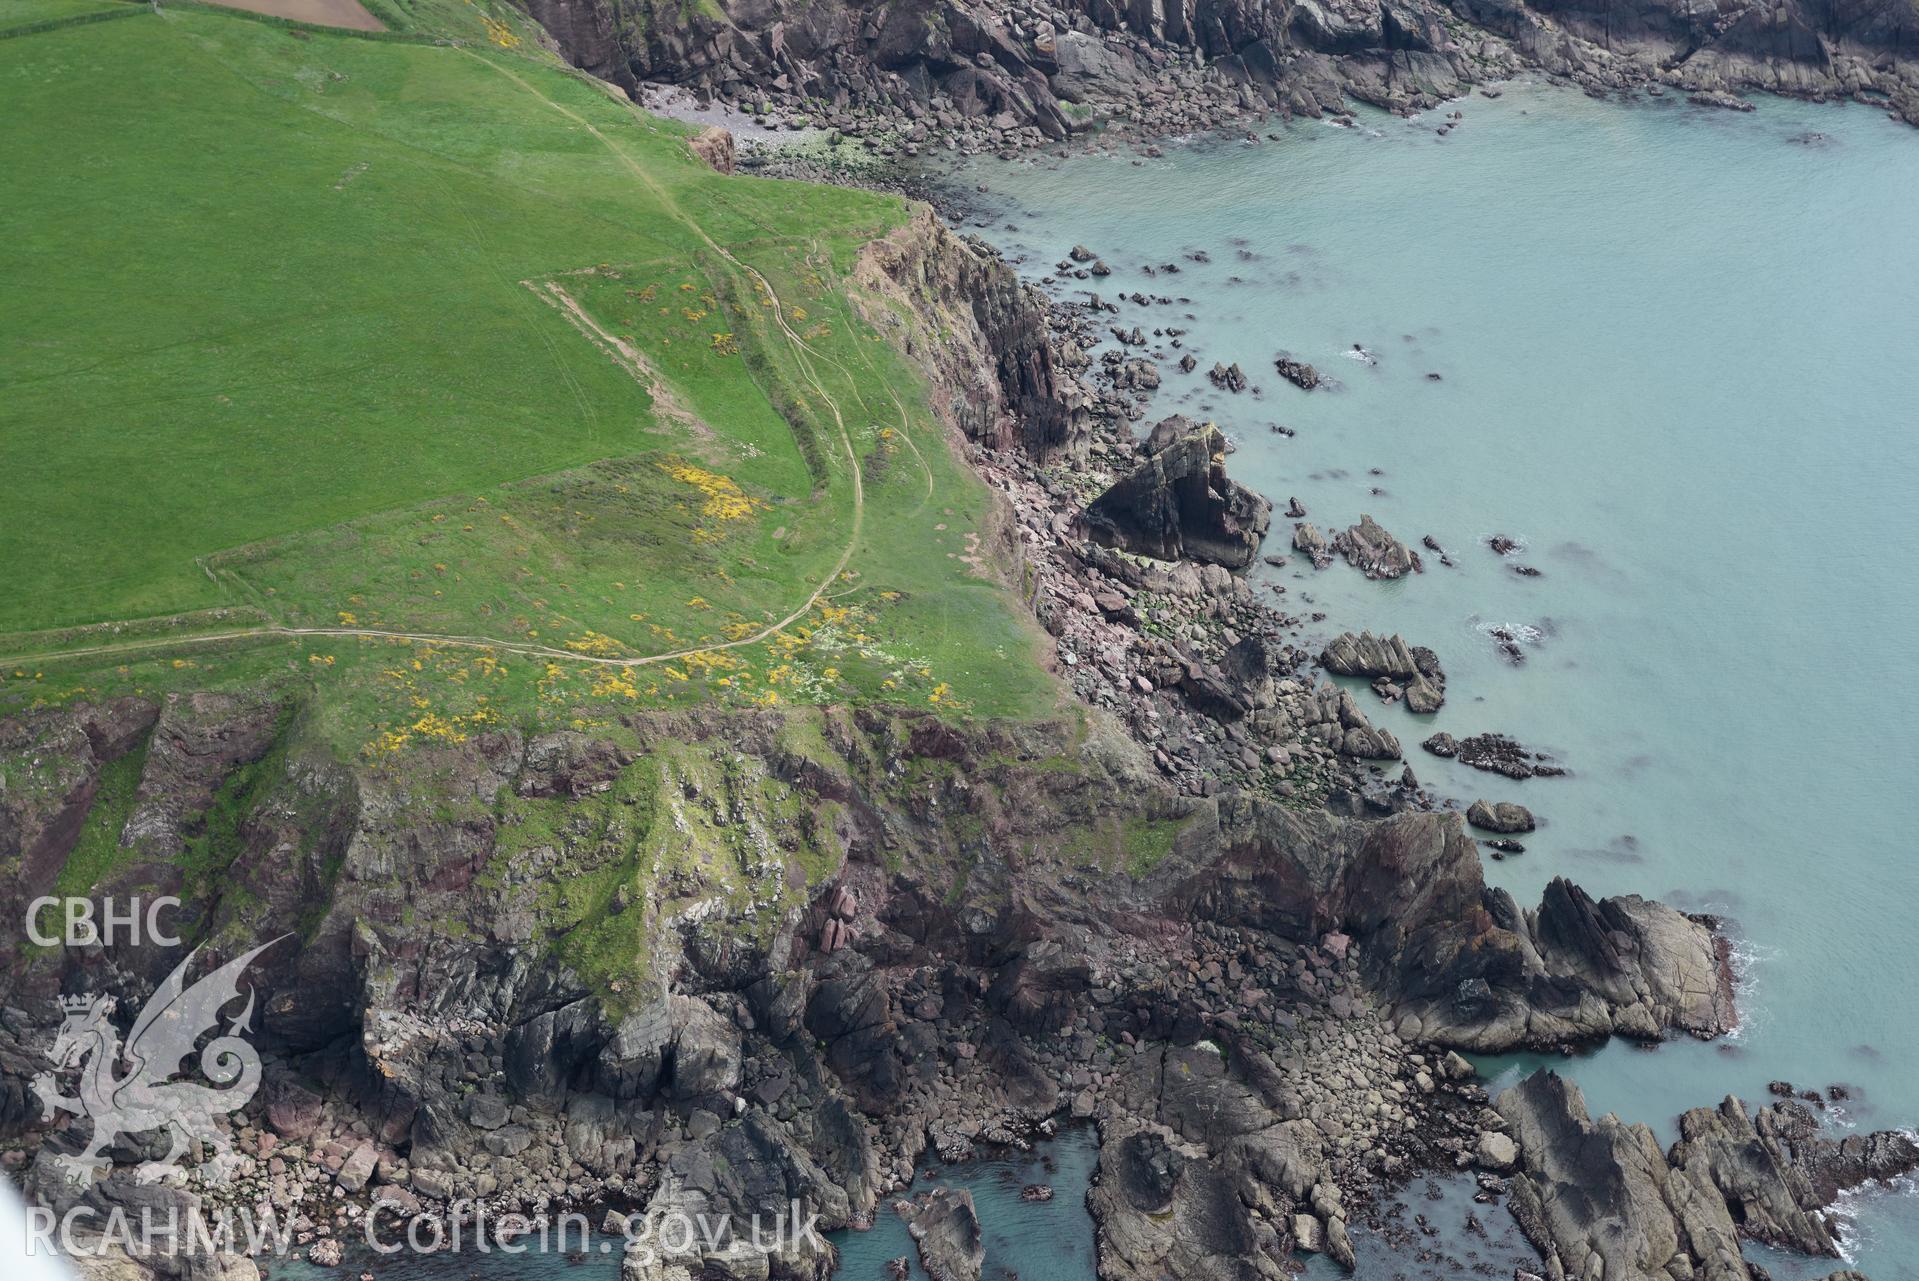 Little Castle Point. Baseline aerial reconnaissance survey for the CHERISH Project. ? Crown: CHERISH PROJECT 2017. Produced with EU funds through the Ireland Wales Co-operation Programme 2014-2020. All material made freely available through the Open Government Licence.